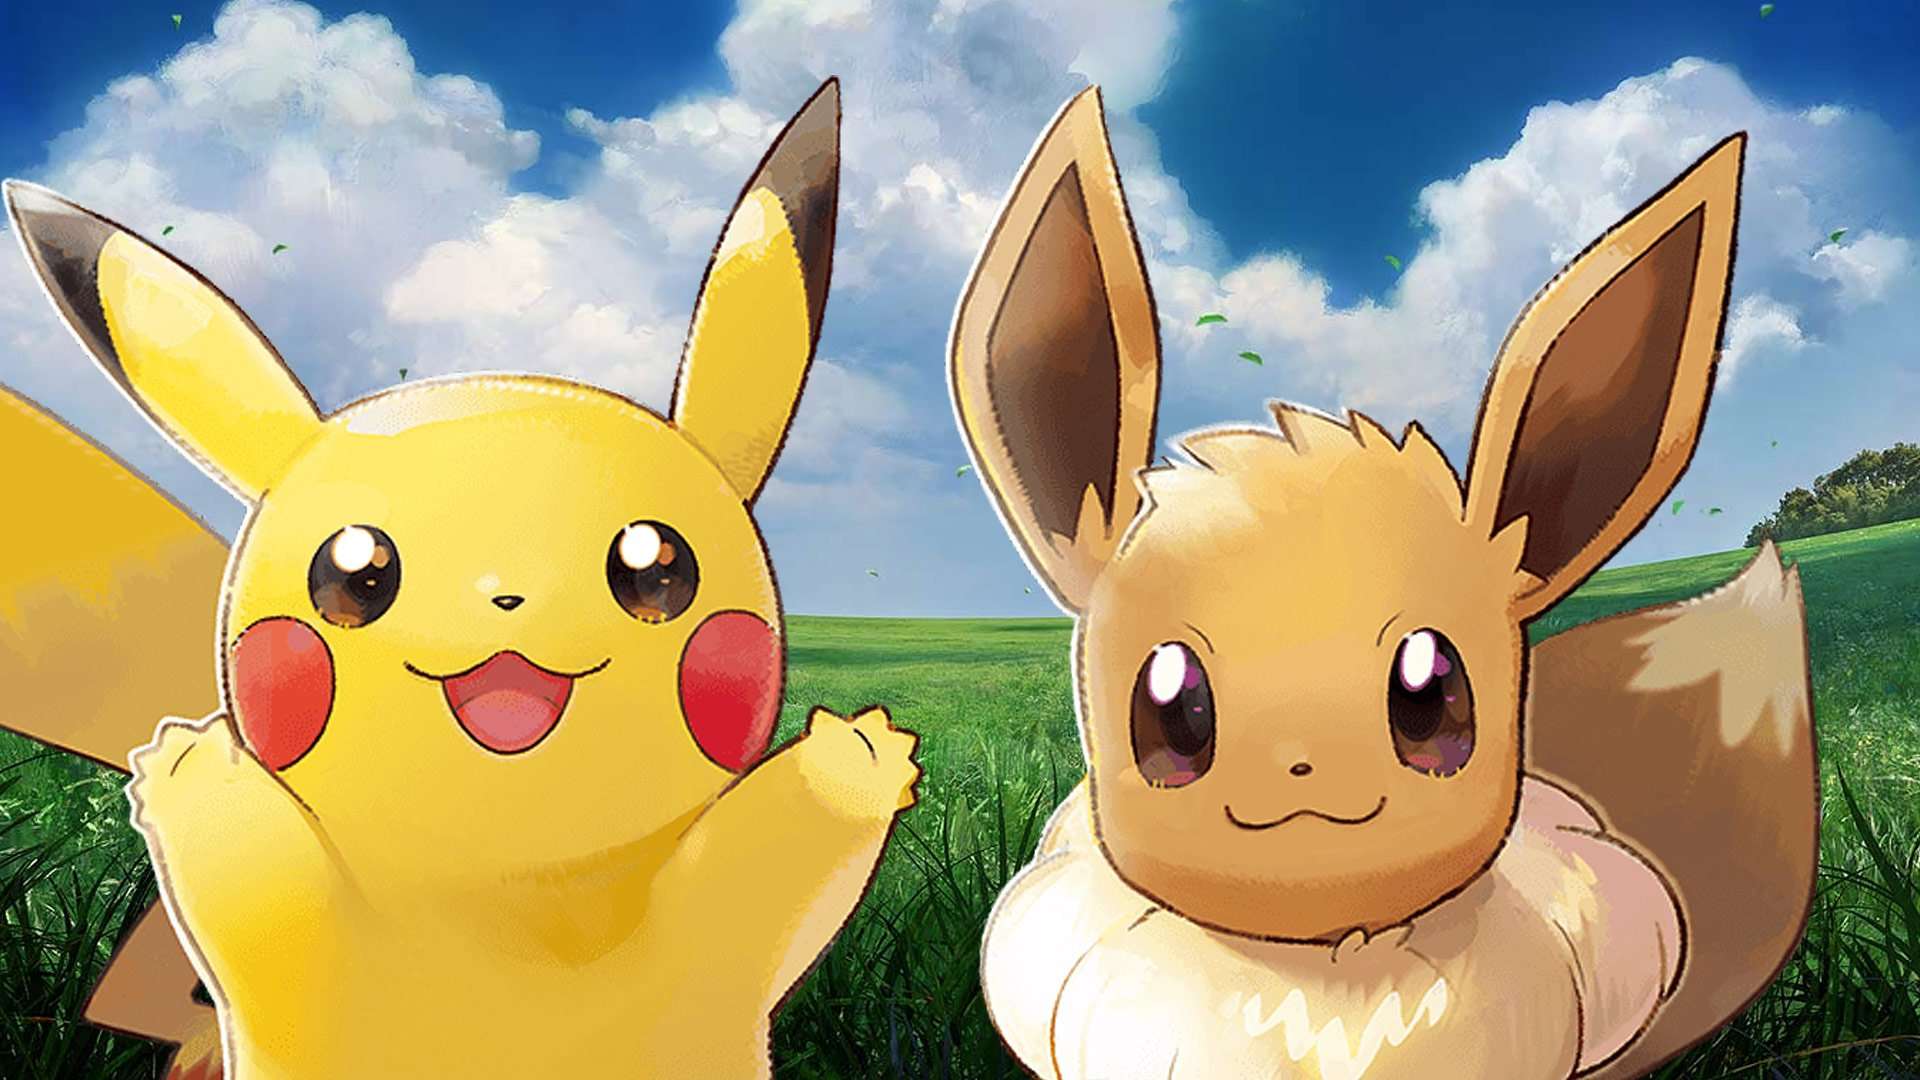 Where to find Pikachu and Eevee in the wild